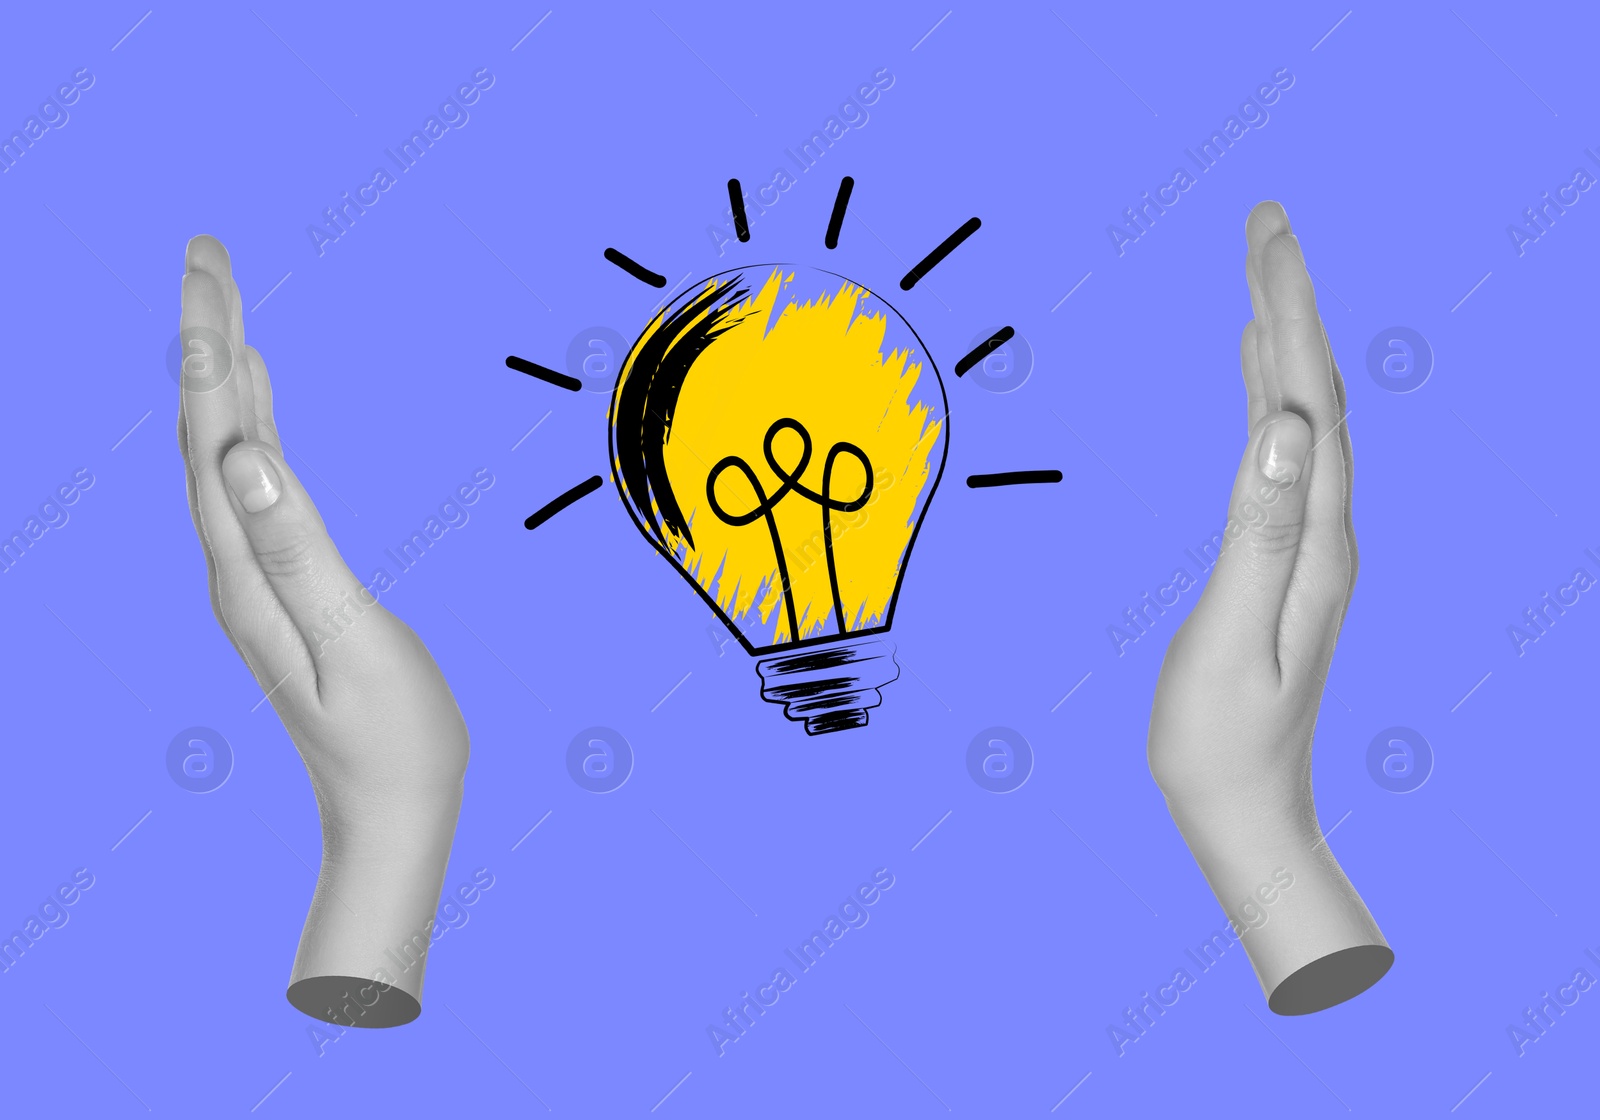 Image of Female hands and illustration of glowing light bulb on violet blue background, creative art collage